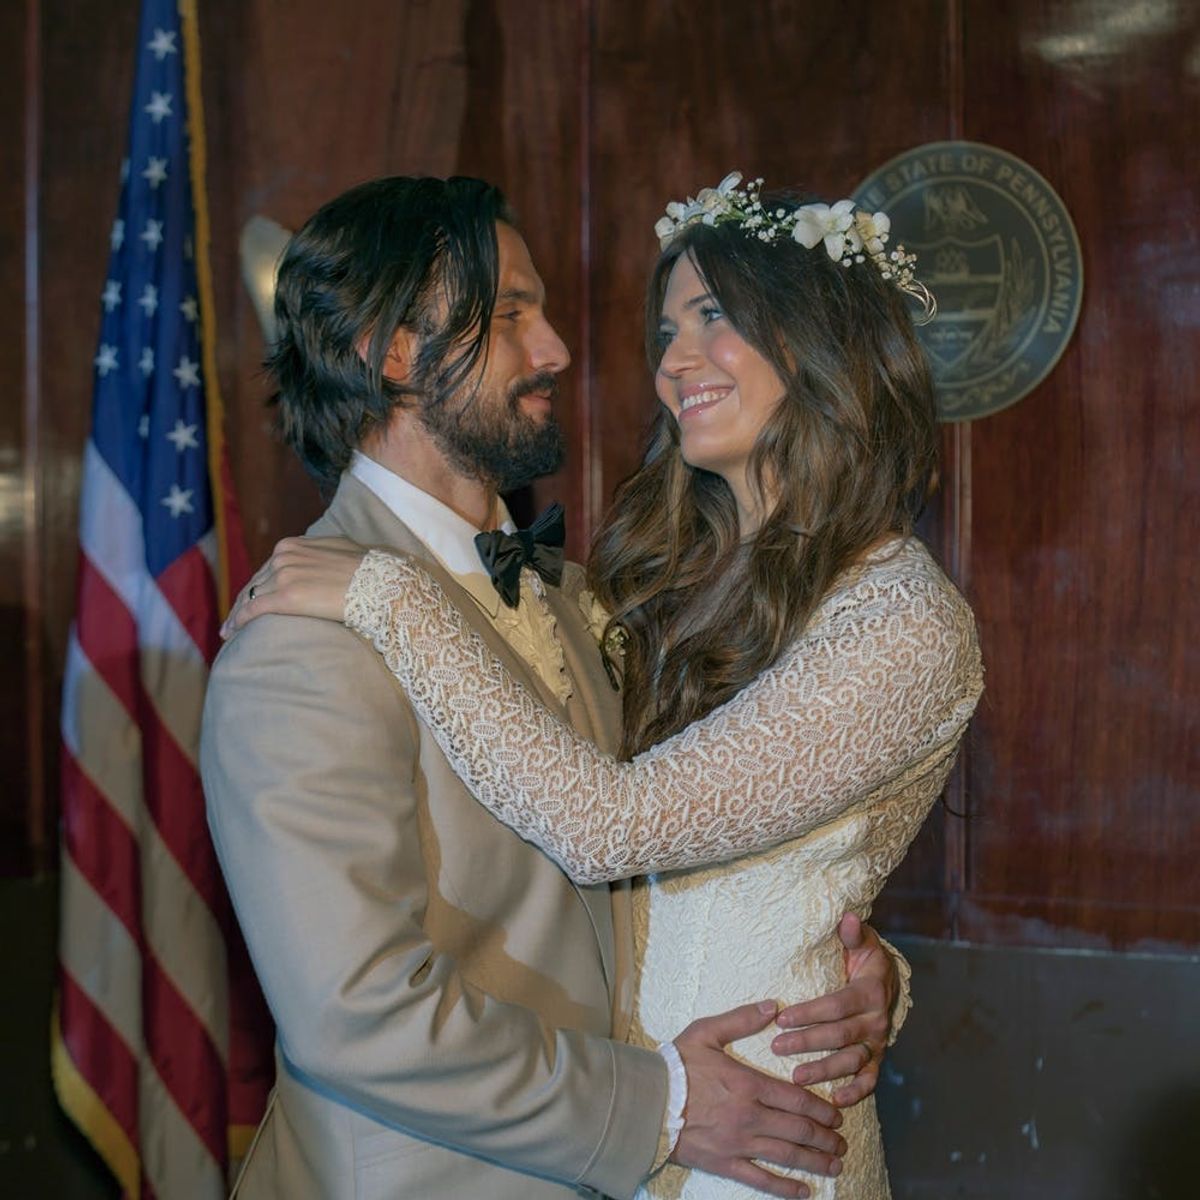 Rest Easy, “This Is Us” Fans: Mandy Moore Says Jack’s “Not Going Anywhere”